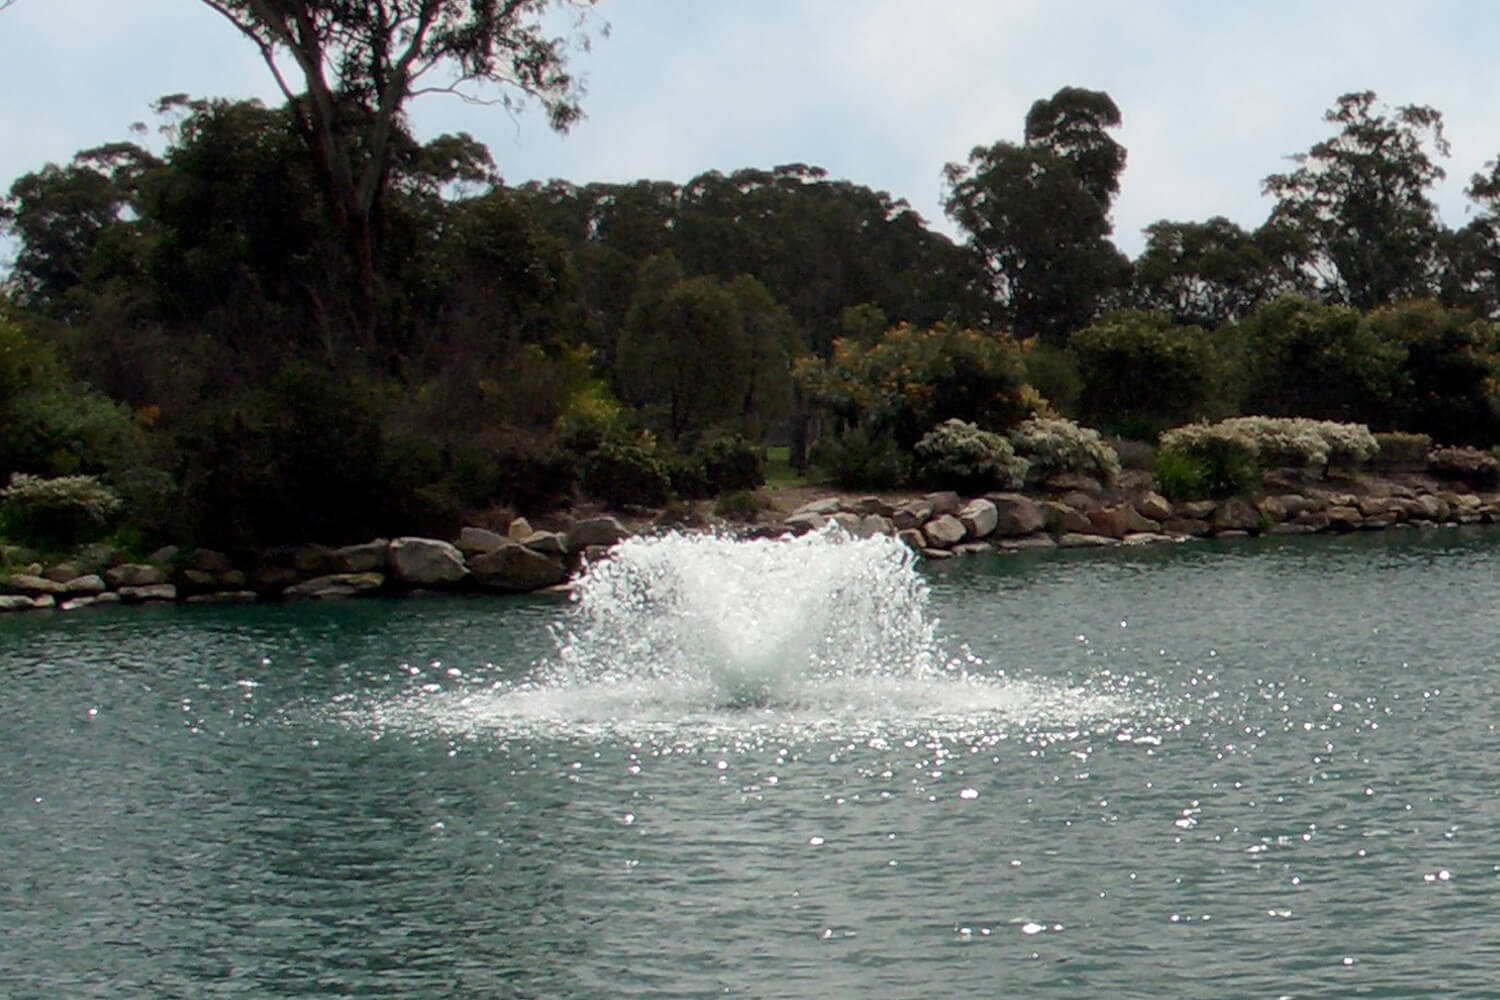 One of Otterbine's Saturn Low-Profile Spray Aerating Fountains